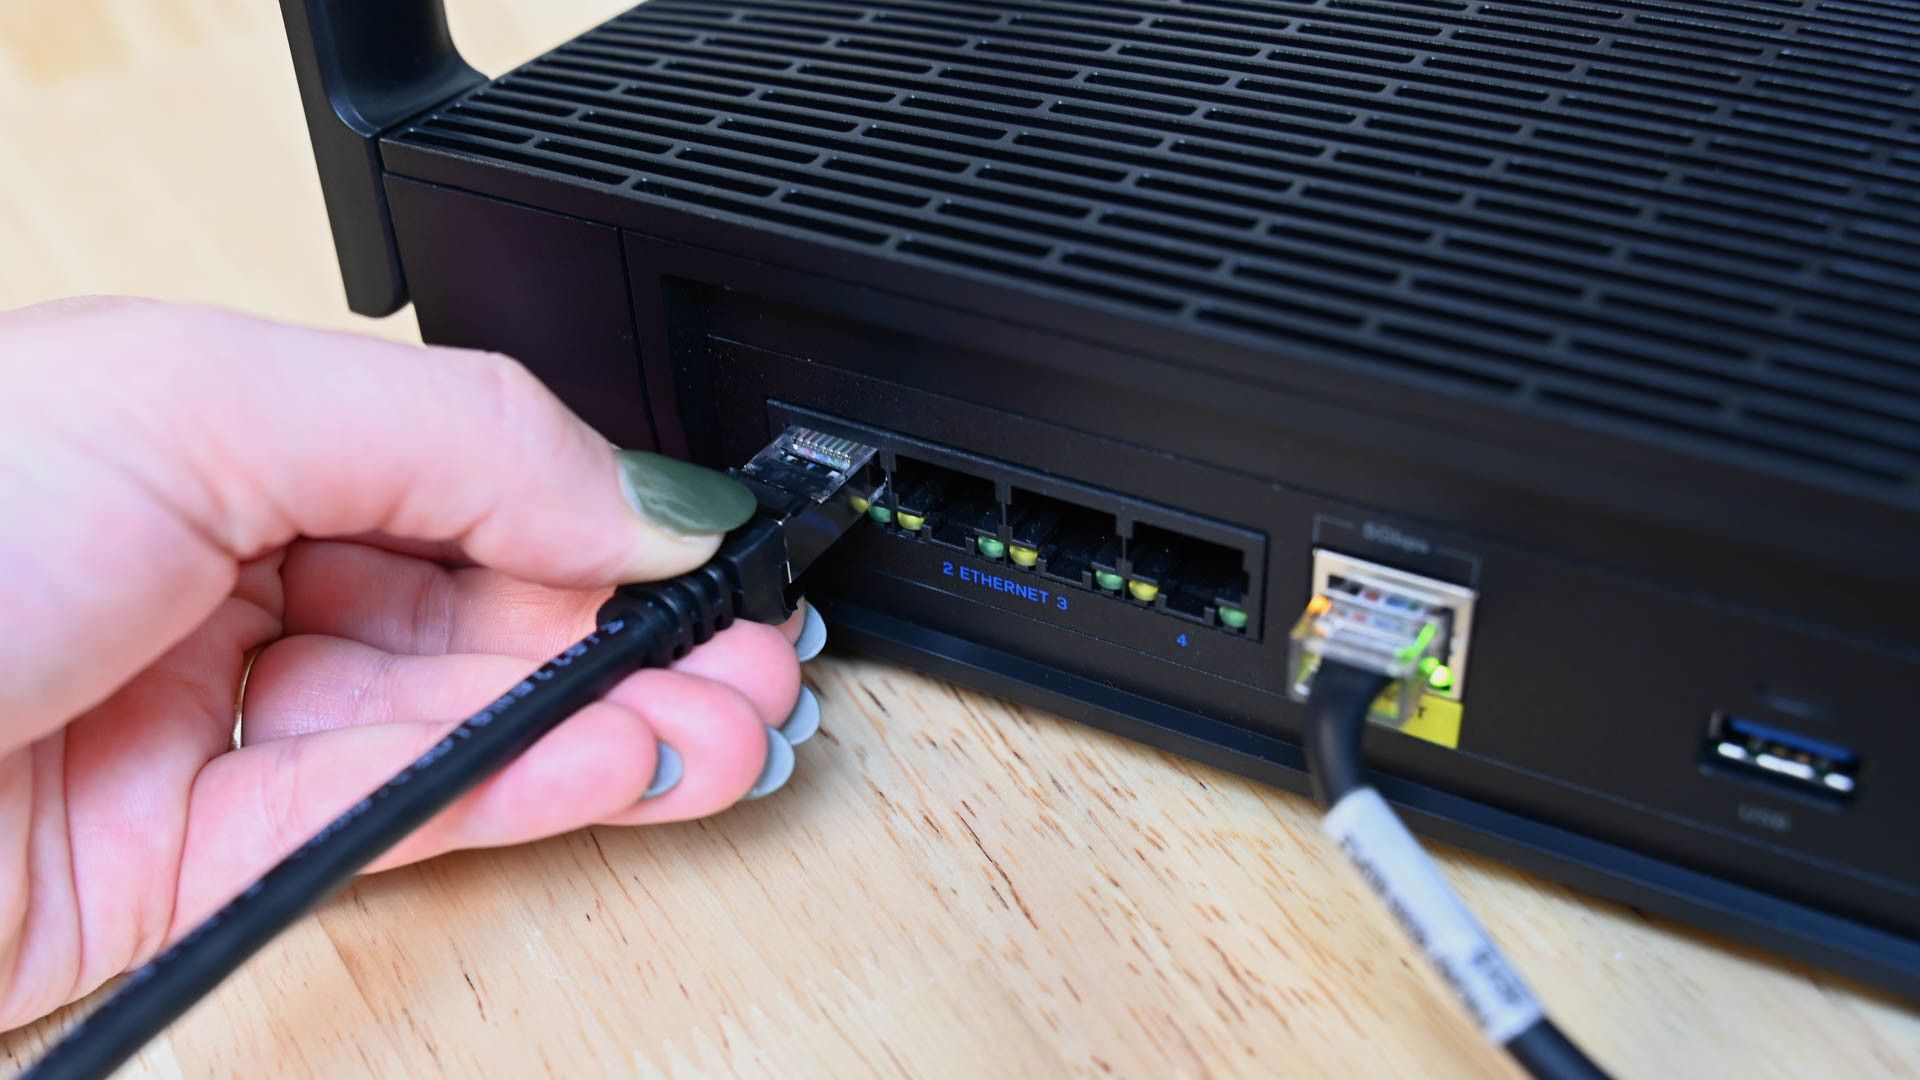 Person plugging in the Cable Matters ethernet cable into a router